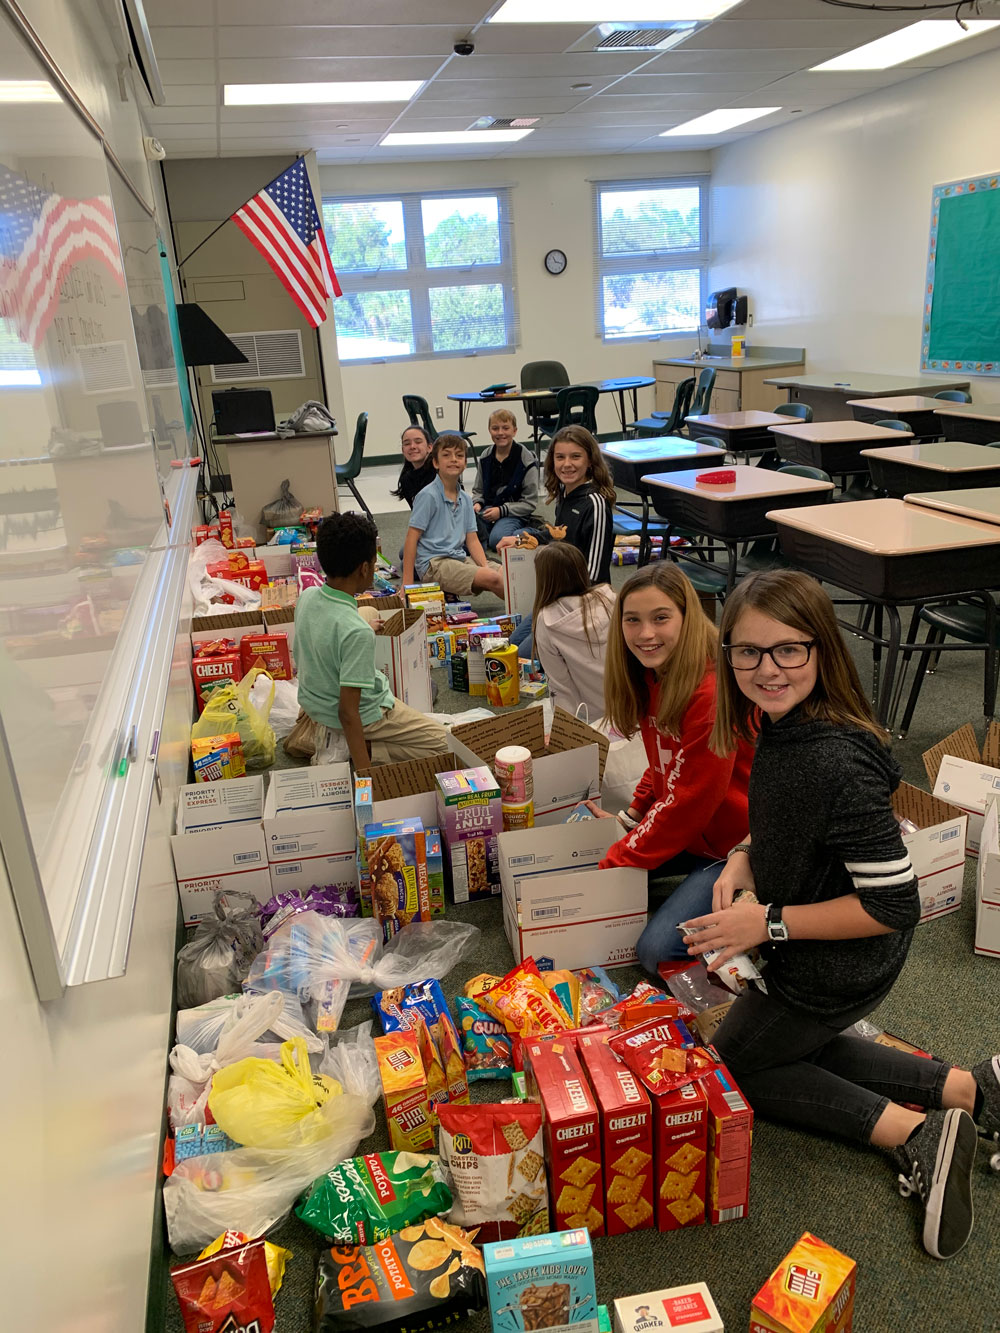 Bunnell Elementary School students this week preparing some of the 81 boxes of goodies for shipment to U.S. servicemen overseas. (Carmen Sanford) 